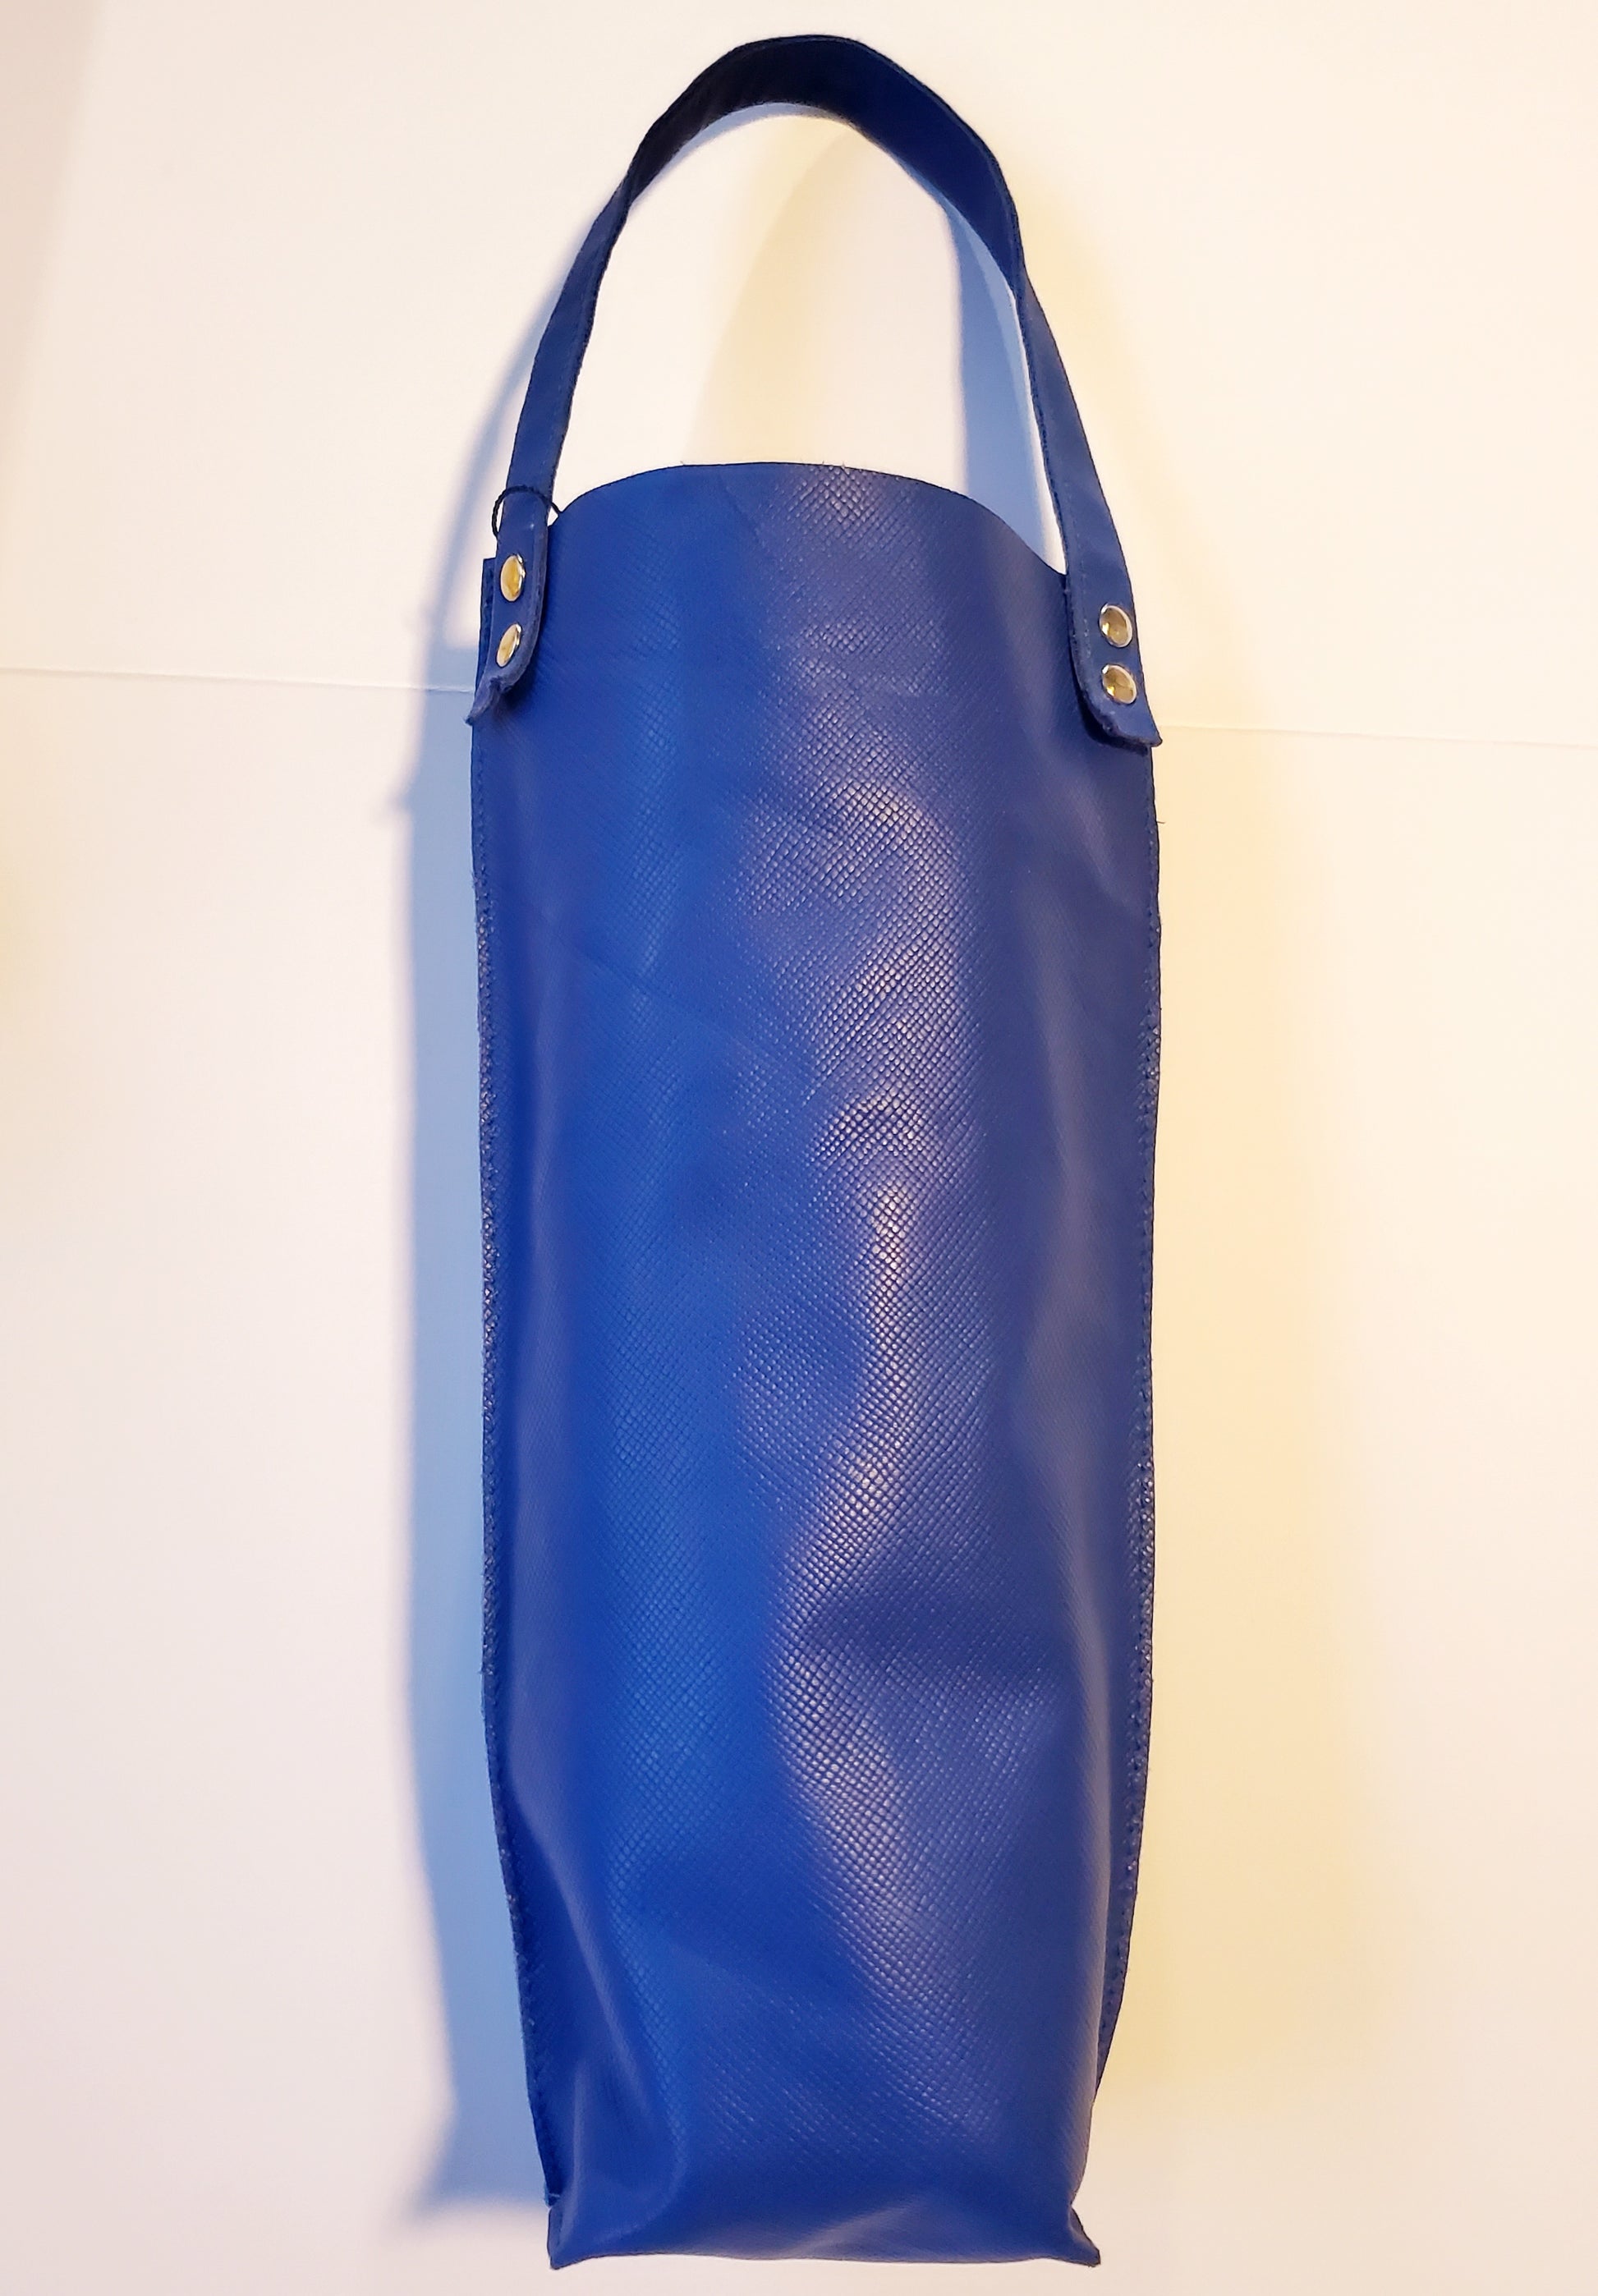 Royal blue bottle bag made in Los Angeles, California